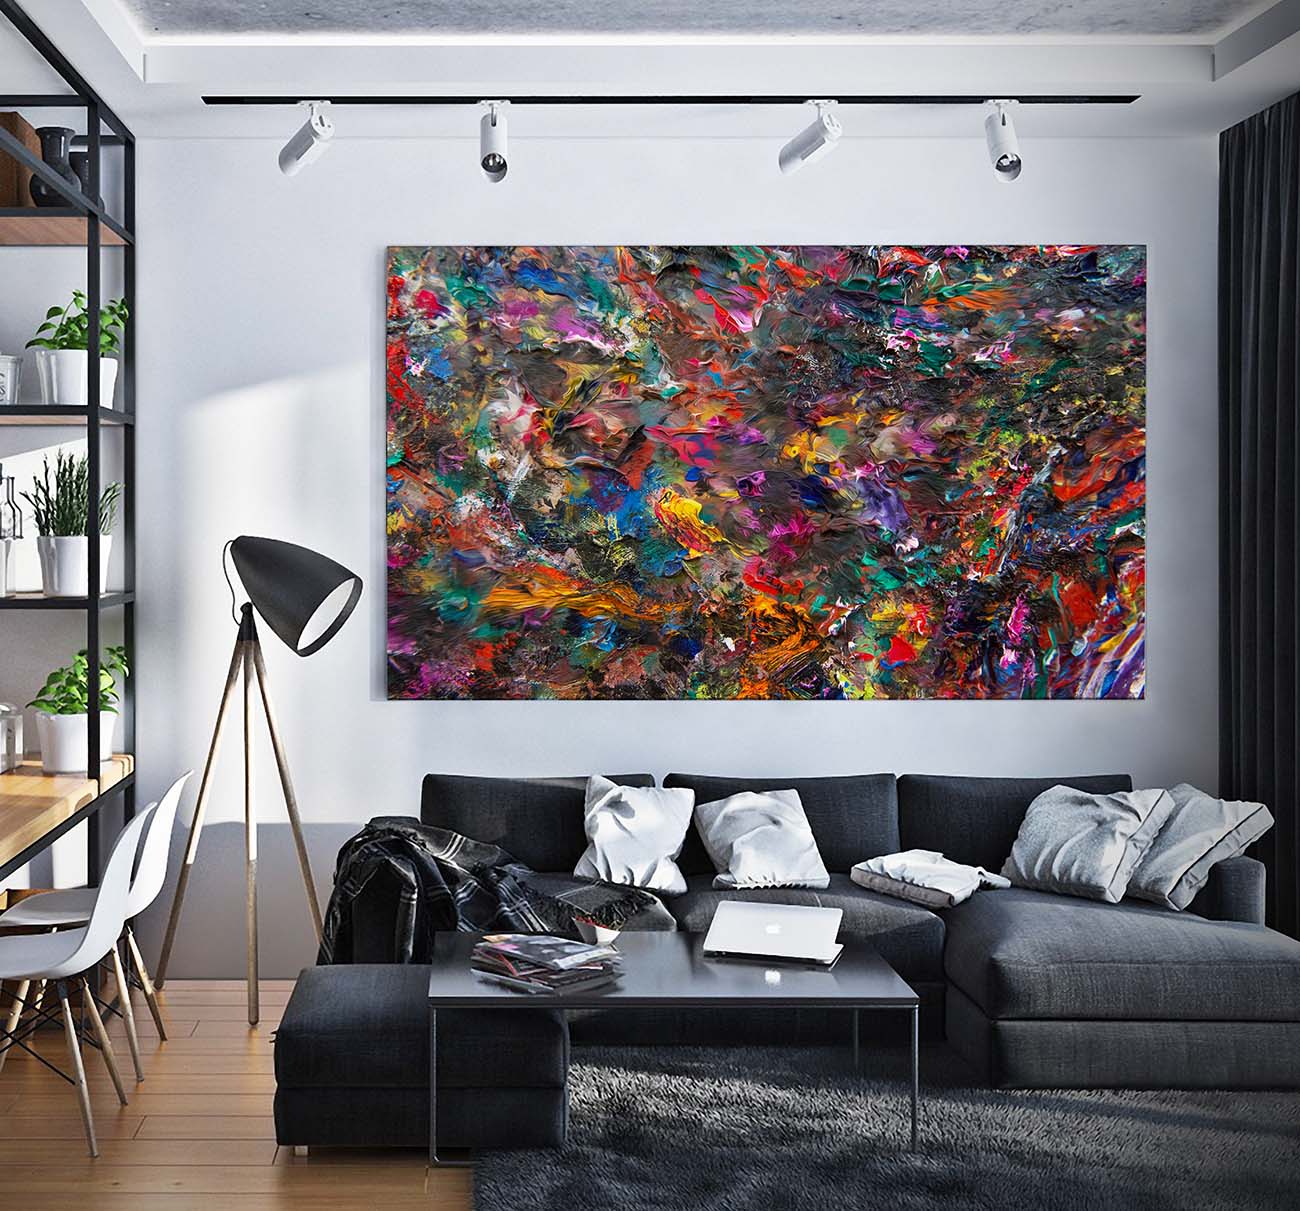 Vid19-57 Sirius Landscape abstract large wall art over a couch by Doug LaRue